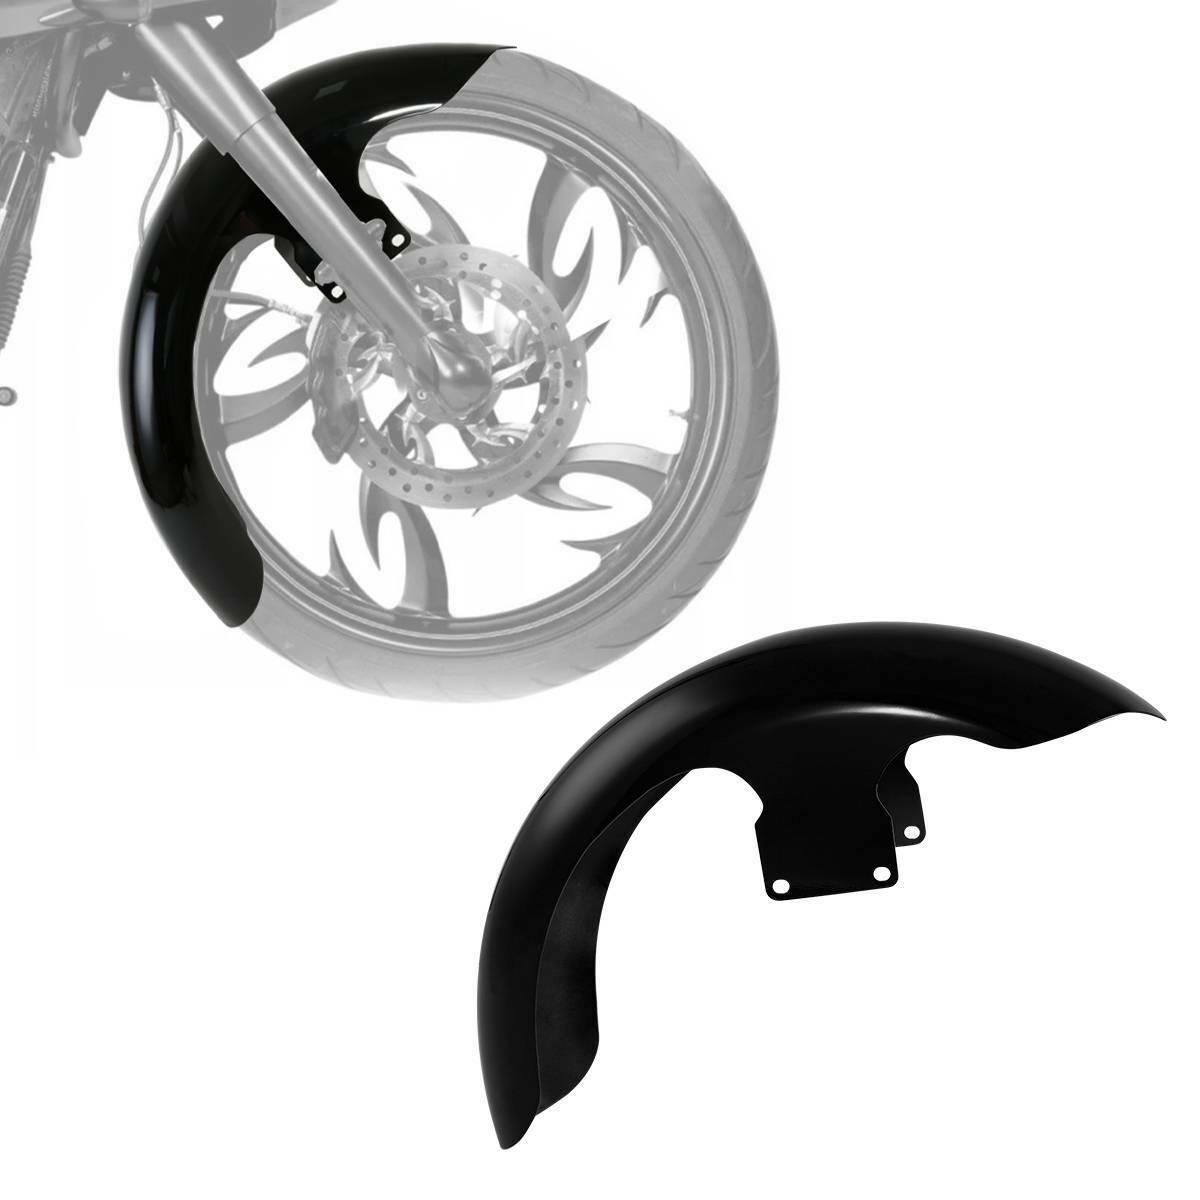 Painted 21" Wrap Front Fender Fit For Harley Touring Road King Glide 97-13 - Moto Life Products